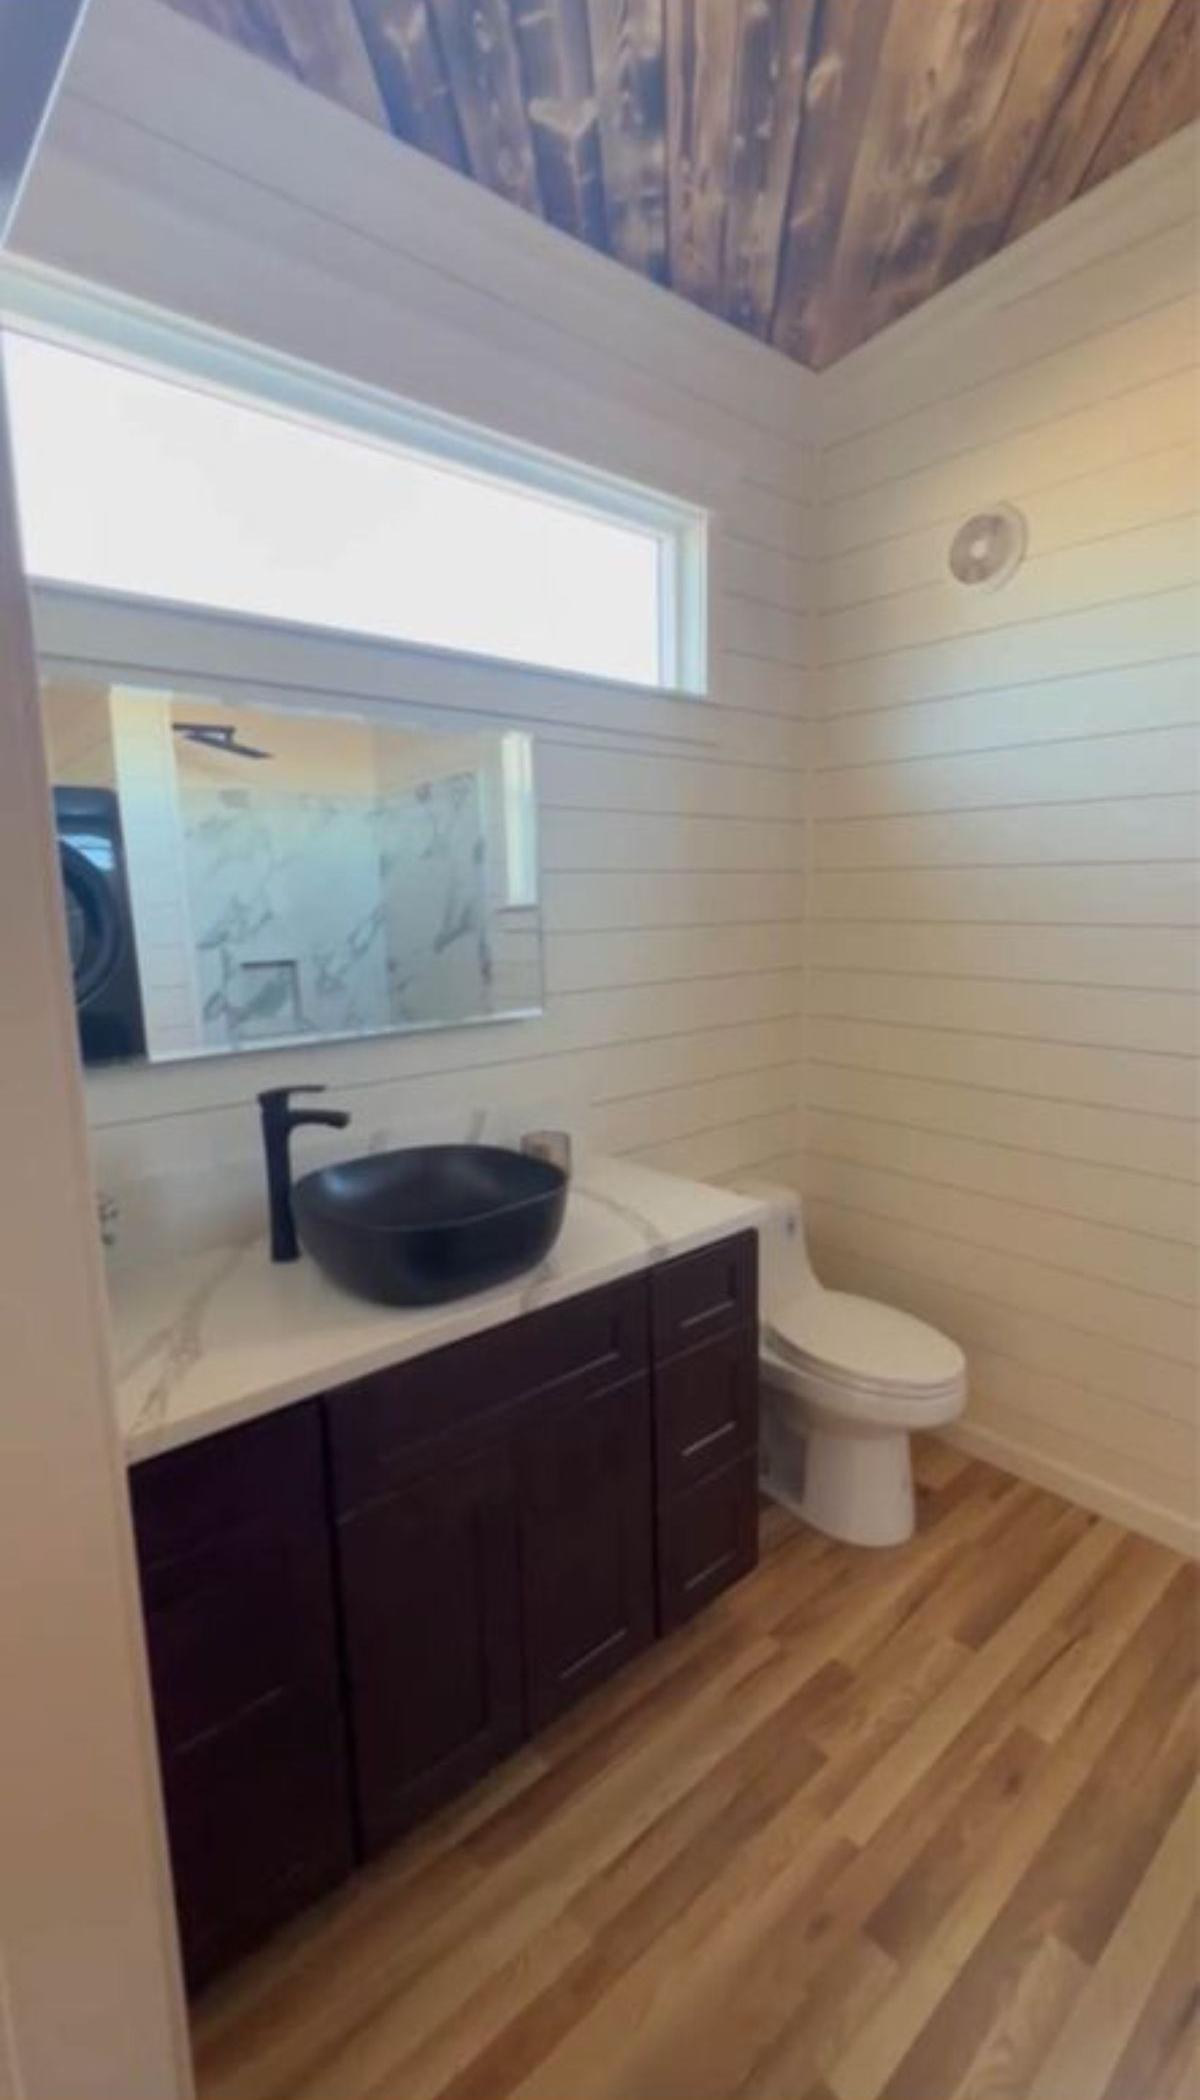 bathroom of airy tiny home  has all the standard fittings